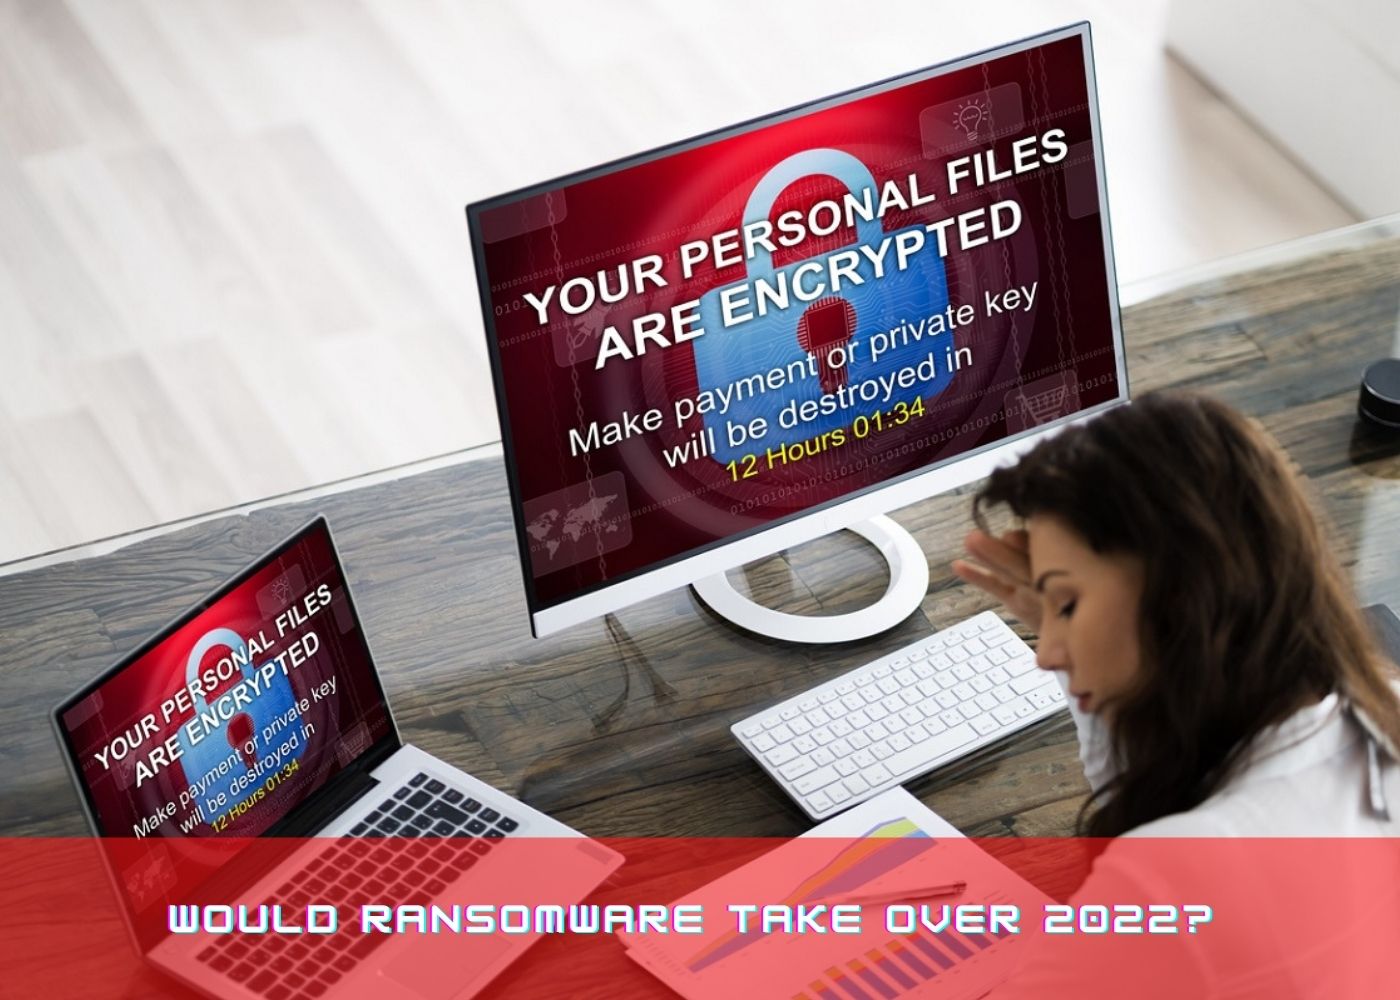 Would Ransomware take over 2022? 